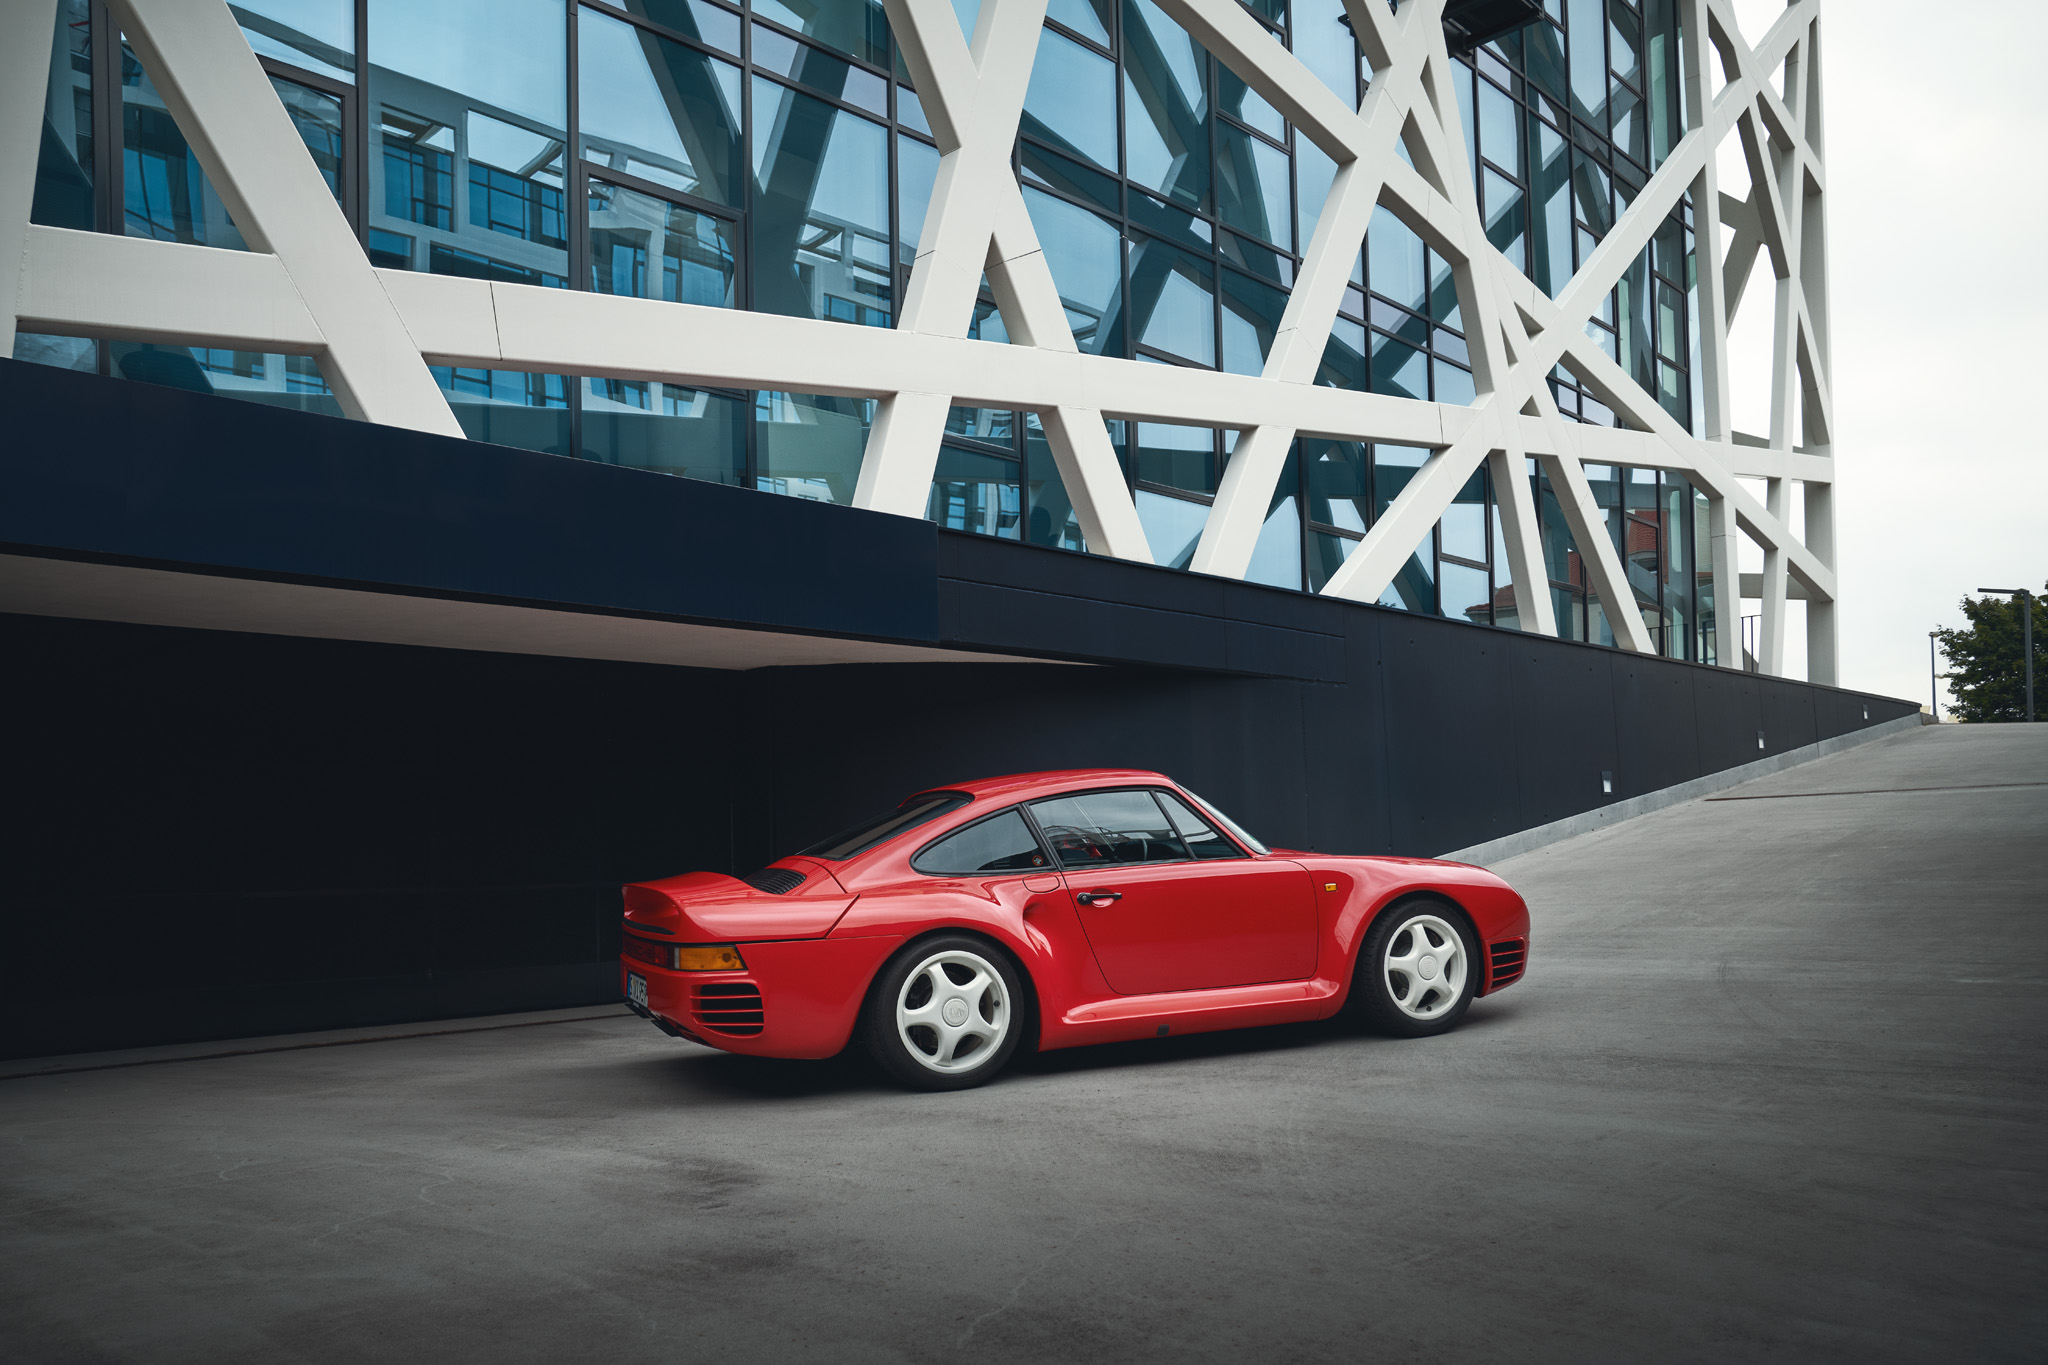 Red Porsche 959 production car driving past modern office building